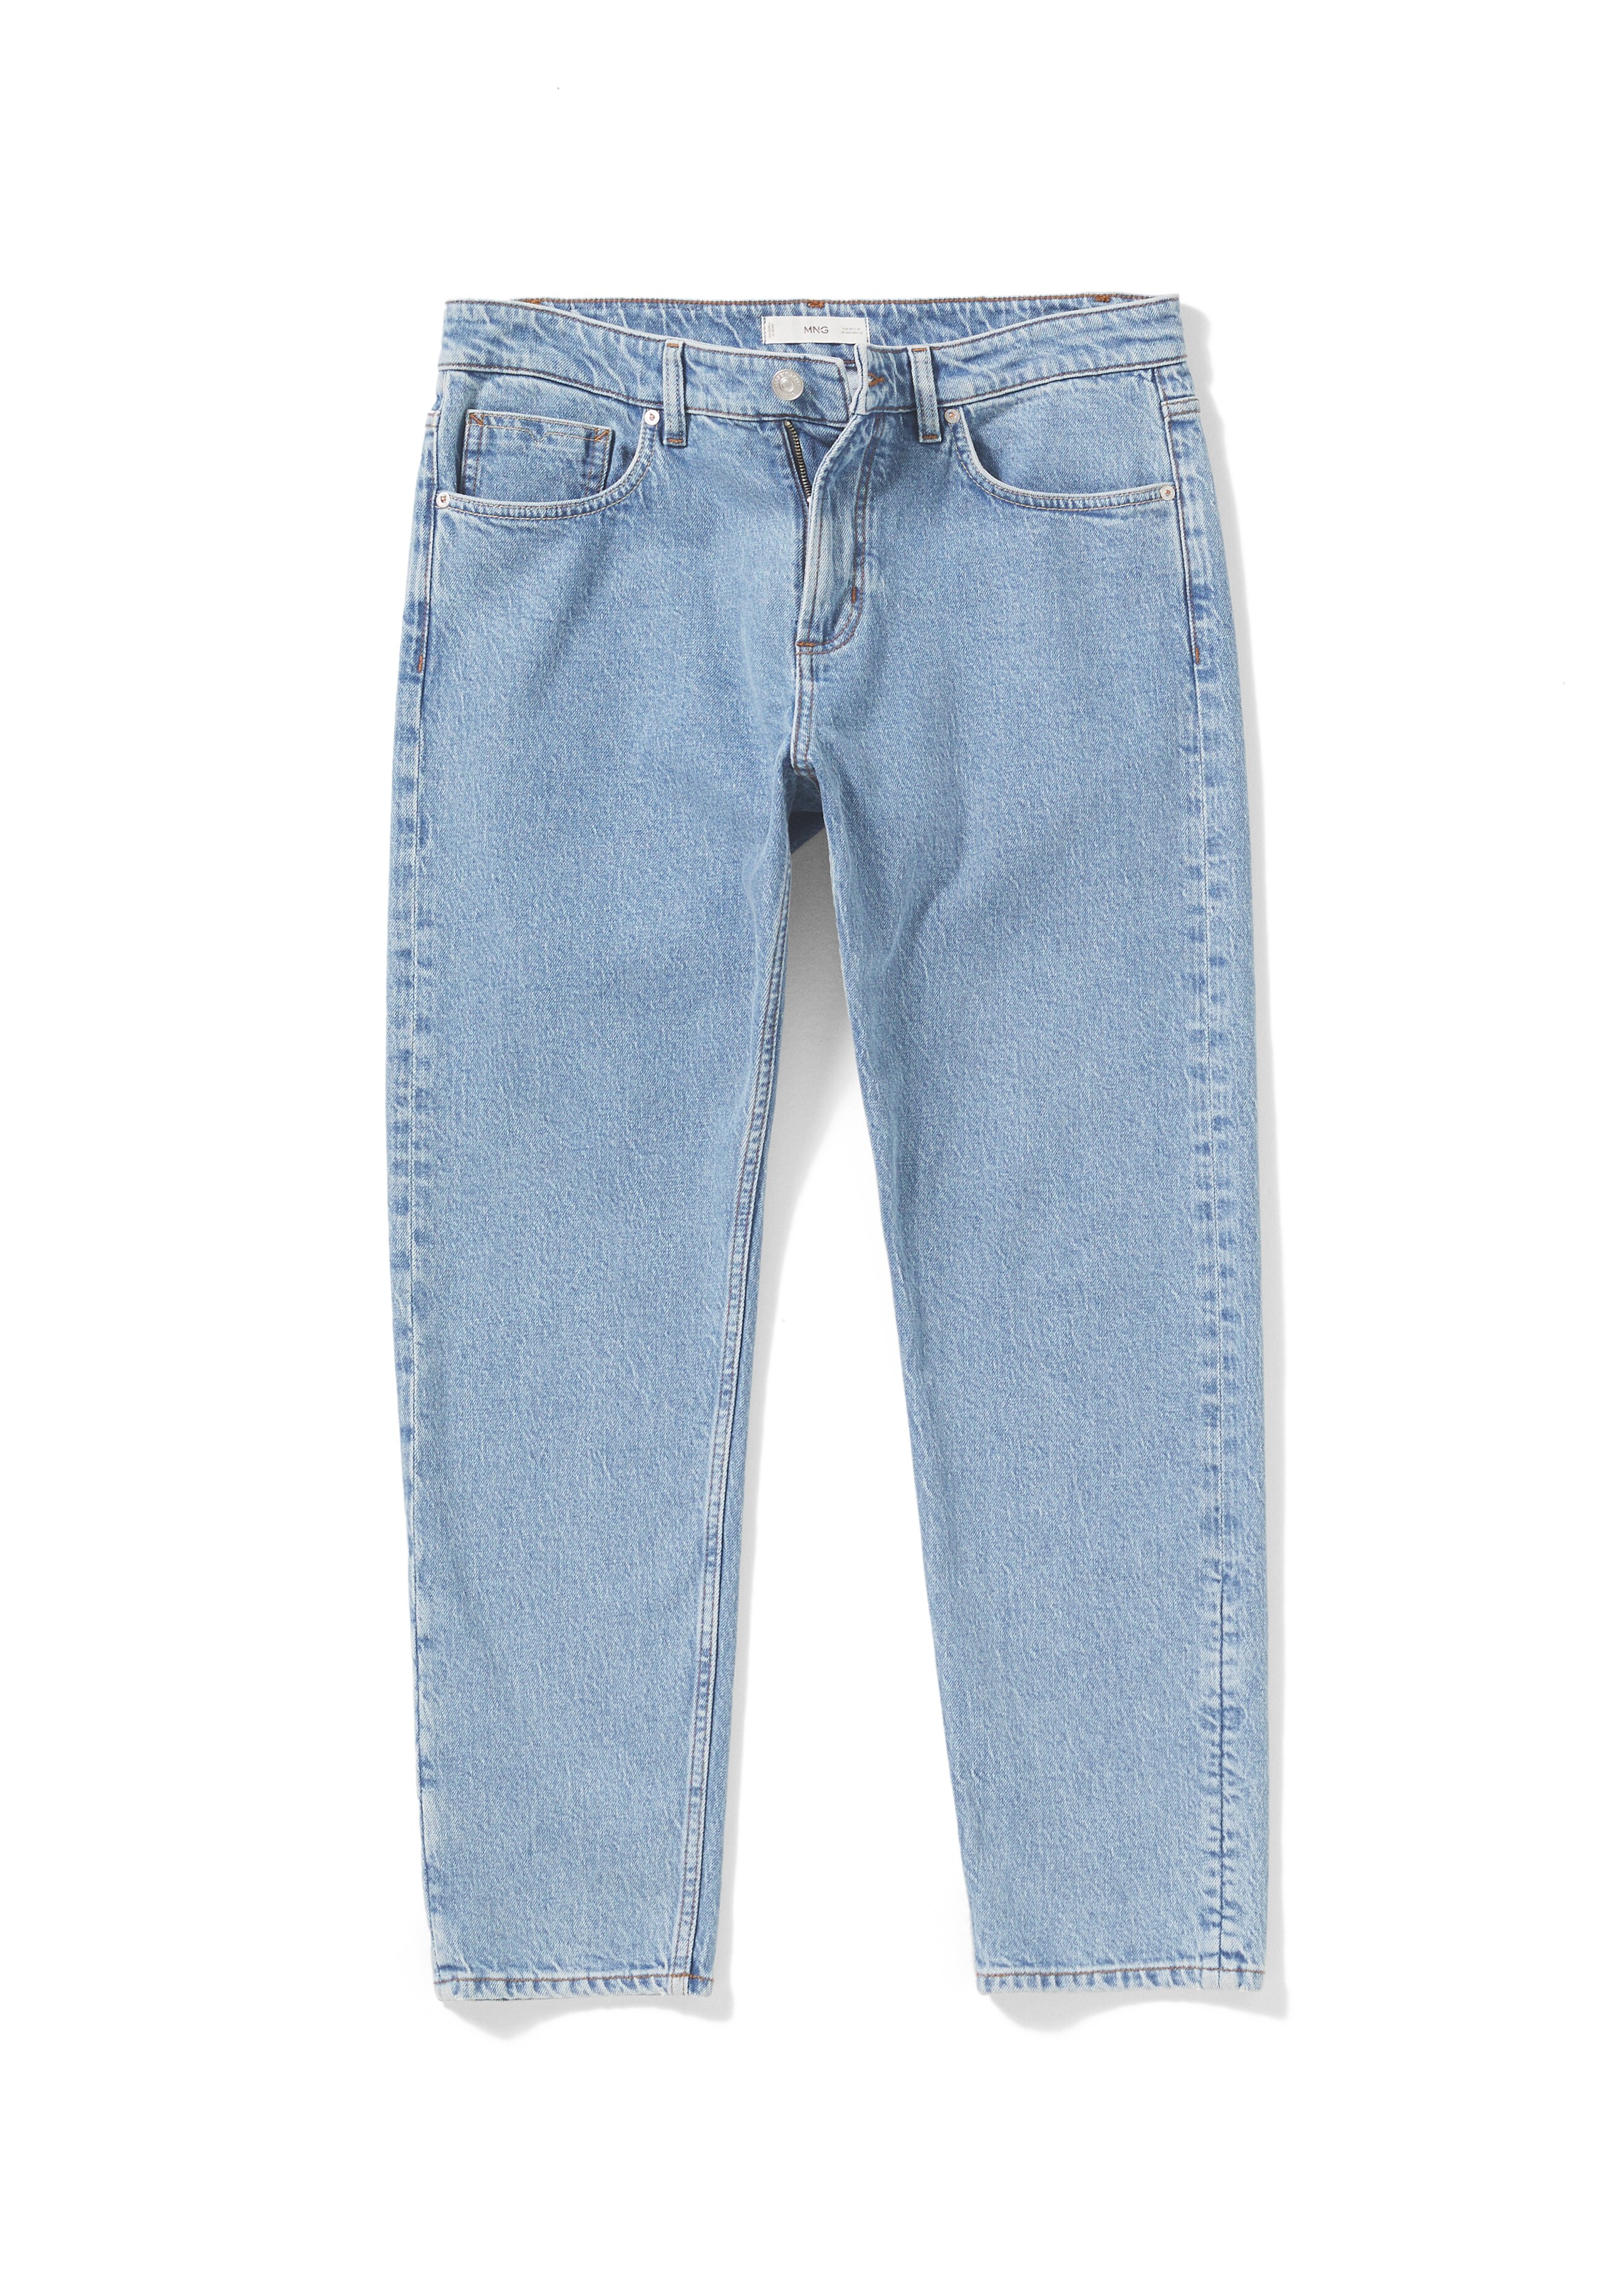 Ben tapered cropped jeans - Details of the article 9